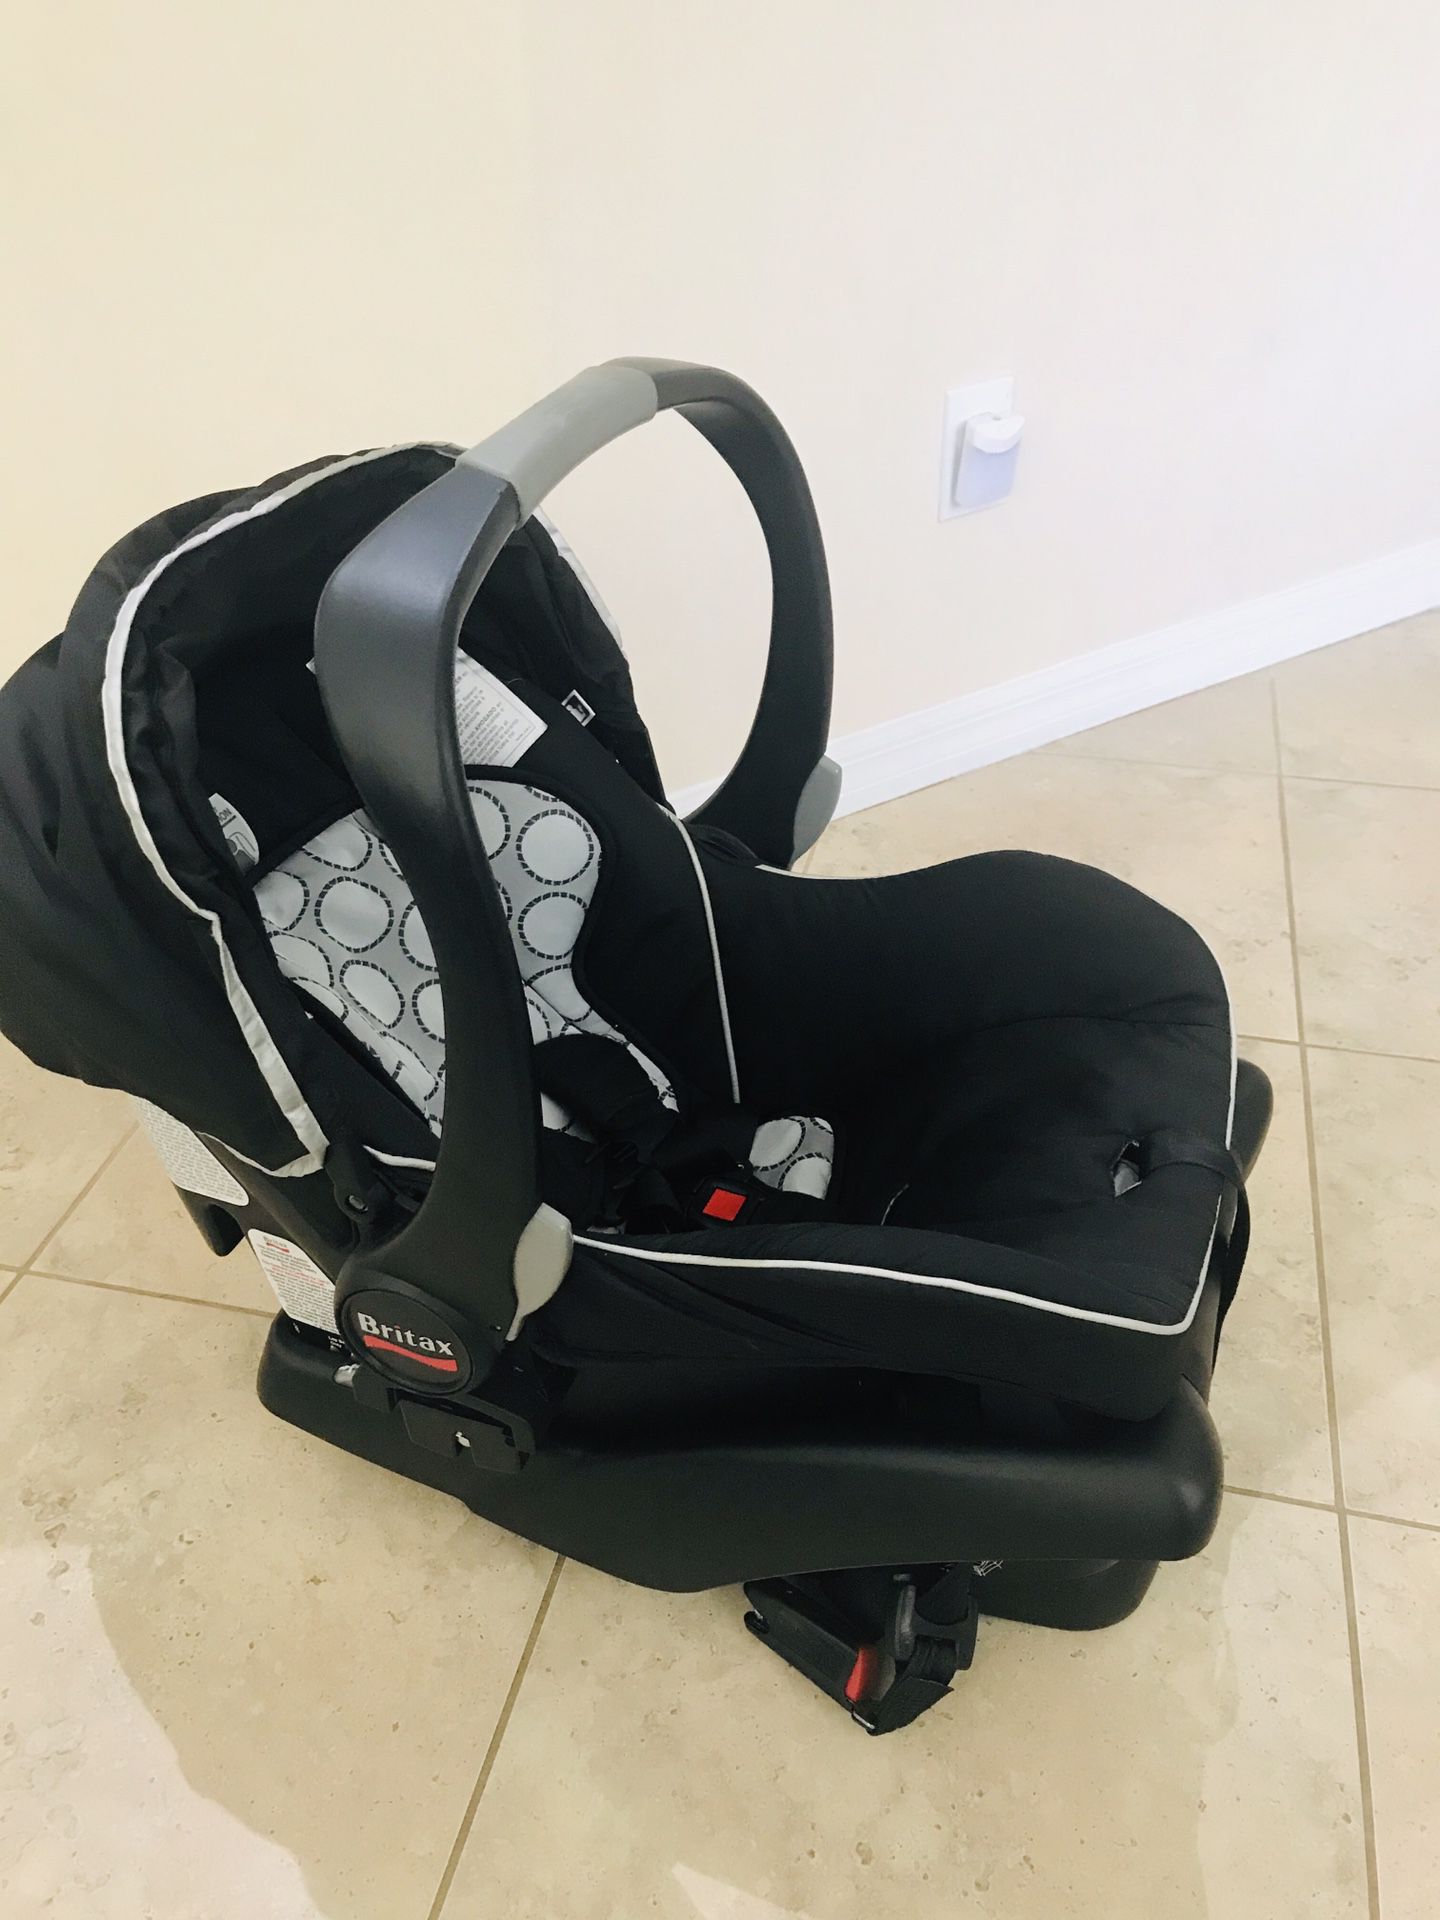 Britax car seat with base